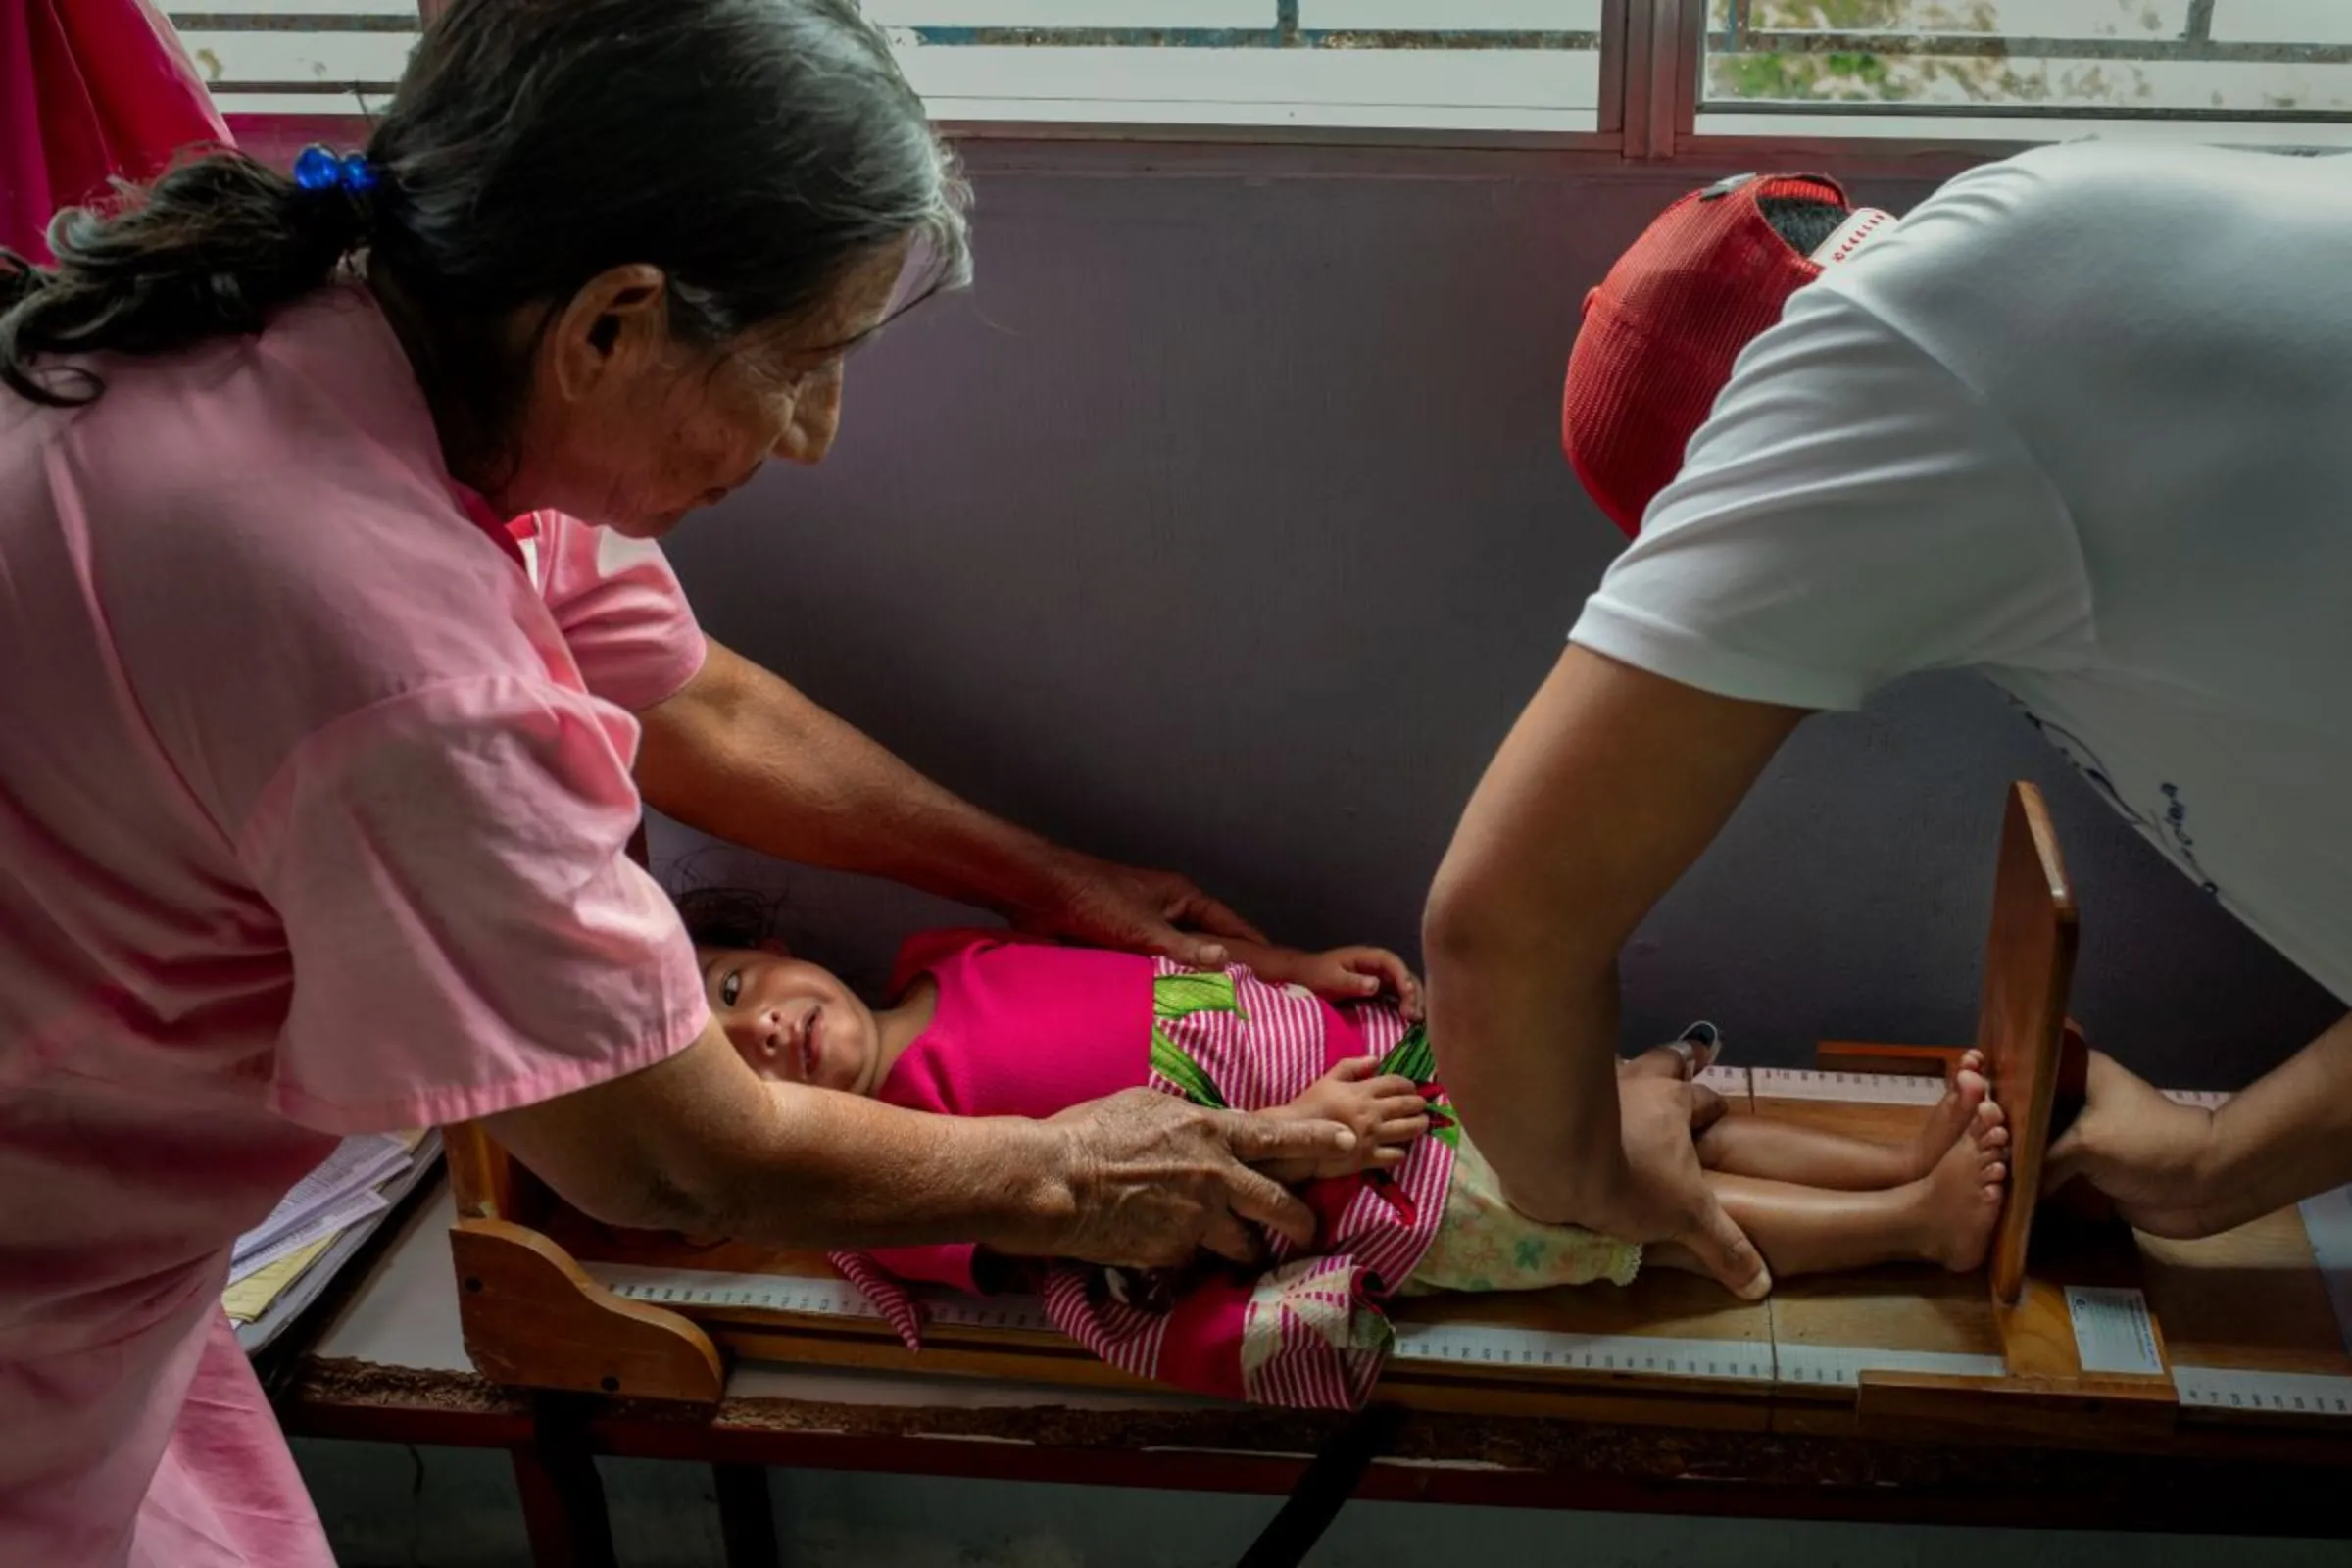 A government nurse checks the height of a malnourished child with her grandmother during a medical check-up in a remote rural clinic in the Camotán municipality in the province of Chiquimula, Guatemala, September 8, 2023. Thomson Reuters Foundation / Fabio Cuttica